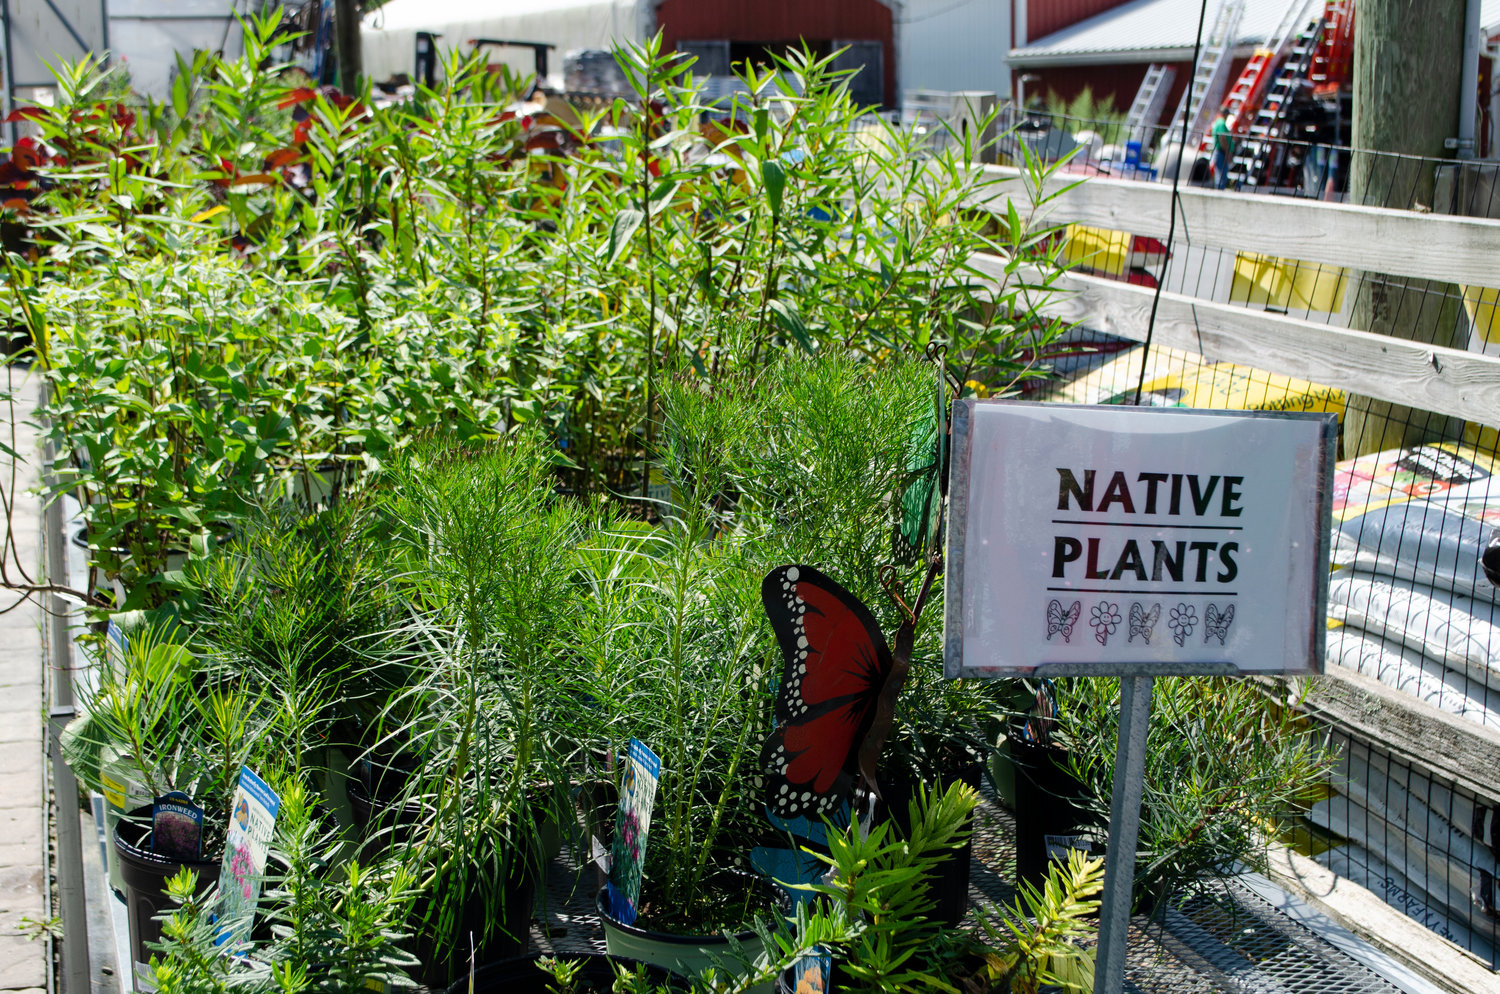 A table of native perrenials on display at Agway.